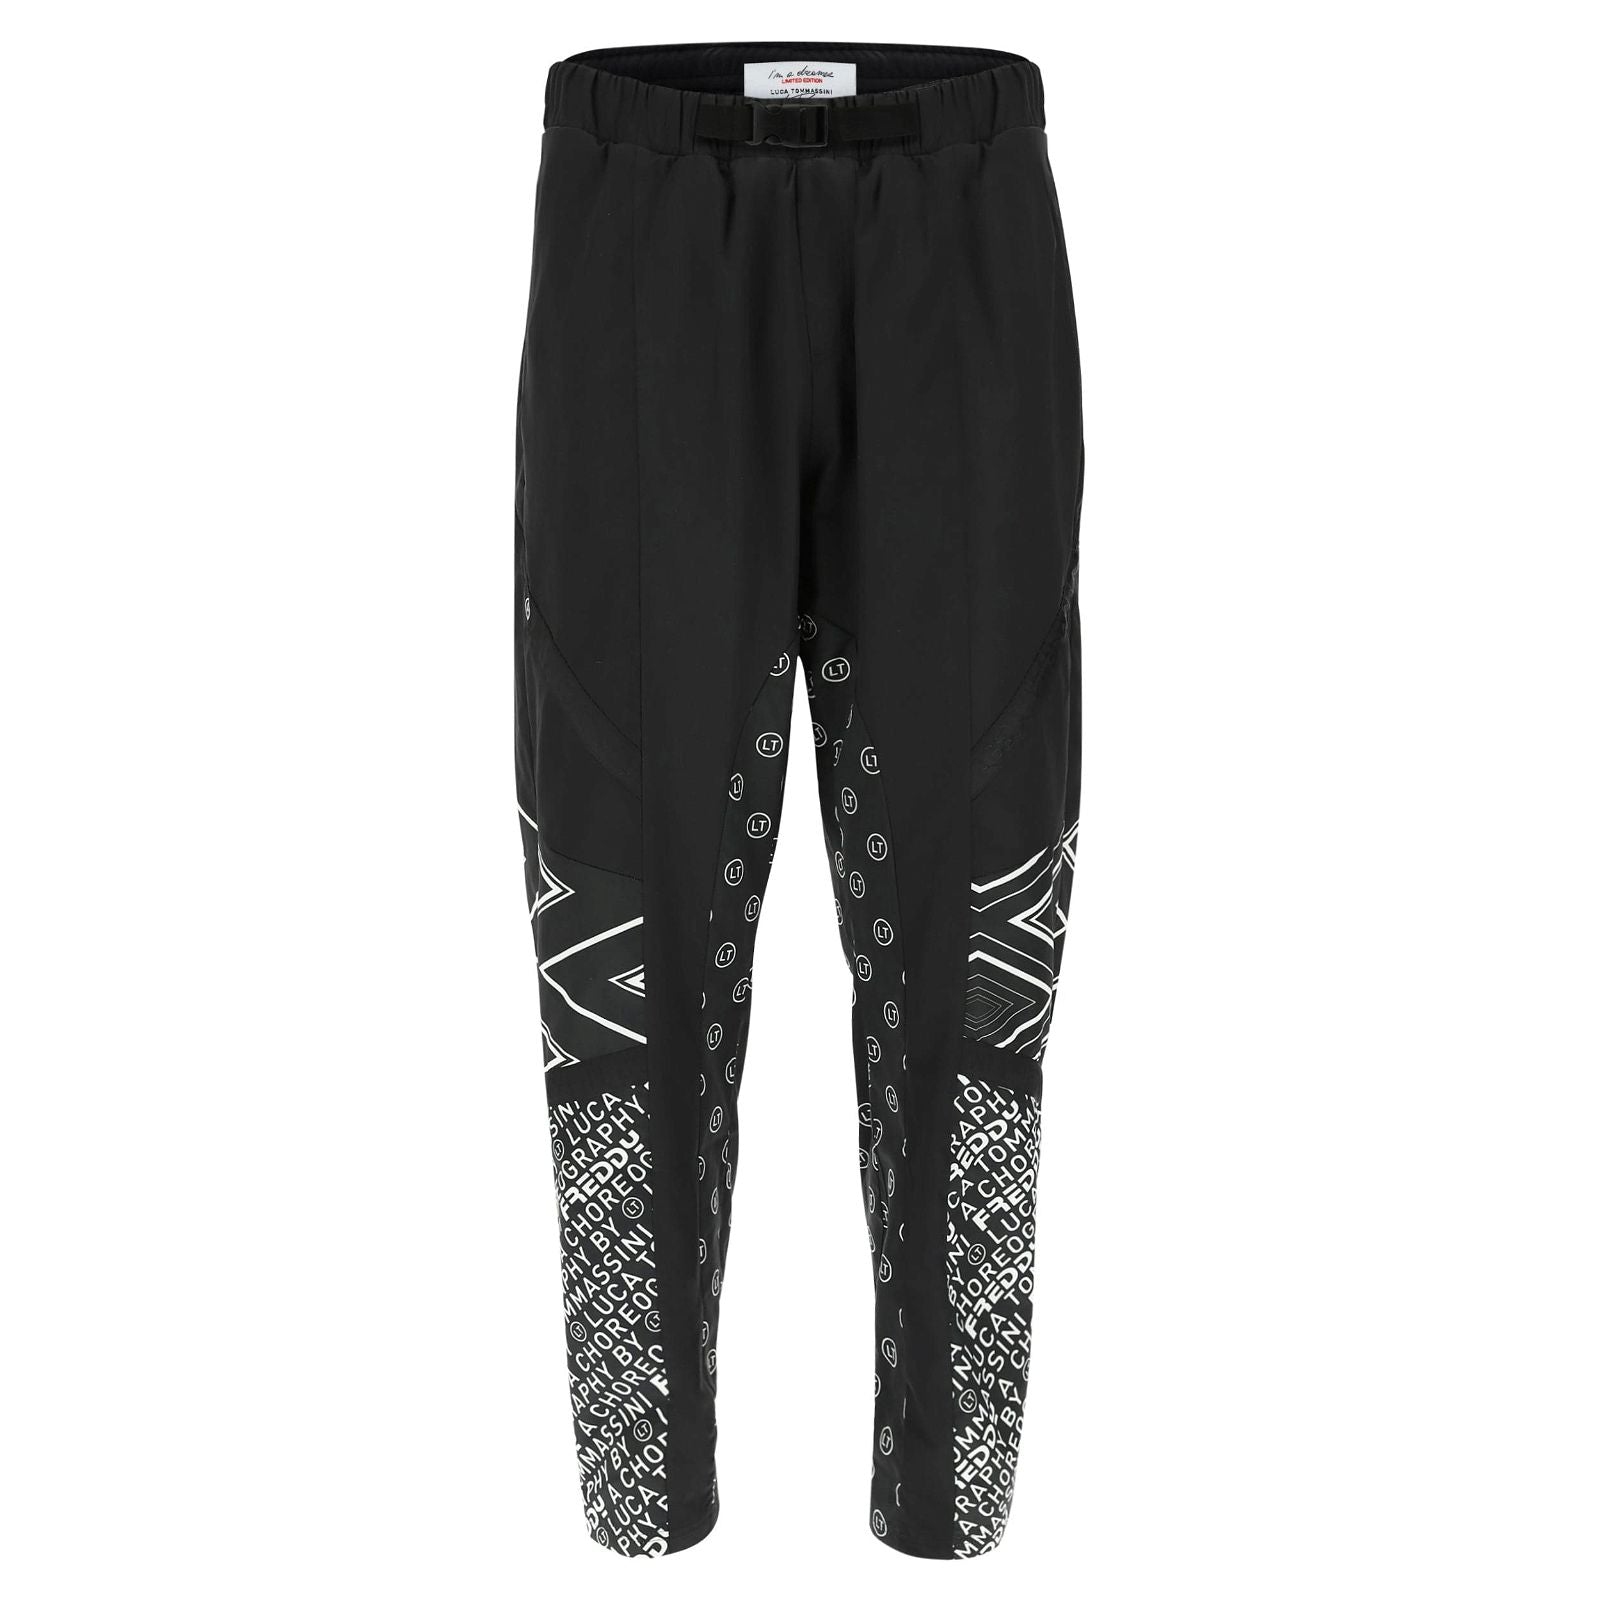 Trousers unisex with pattern print - A Choreography by Luca Tommassini - Black 1